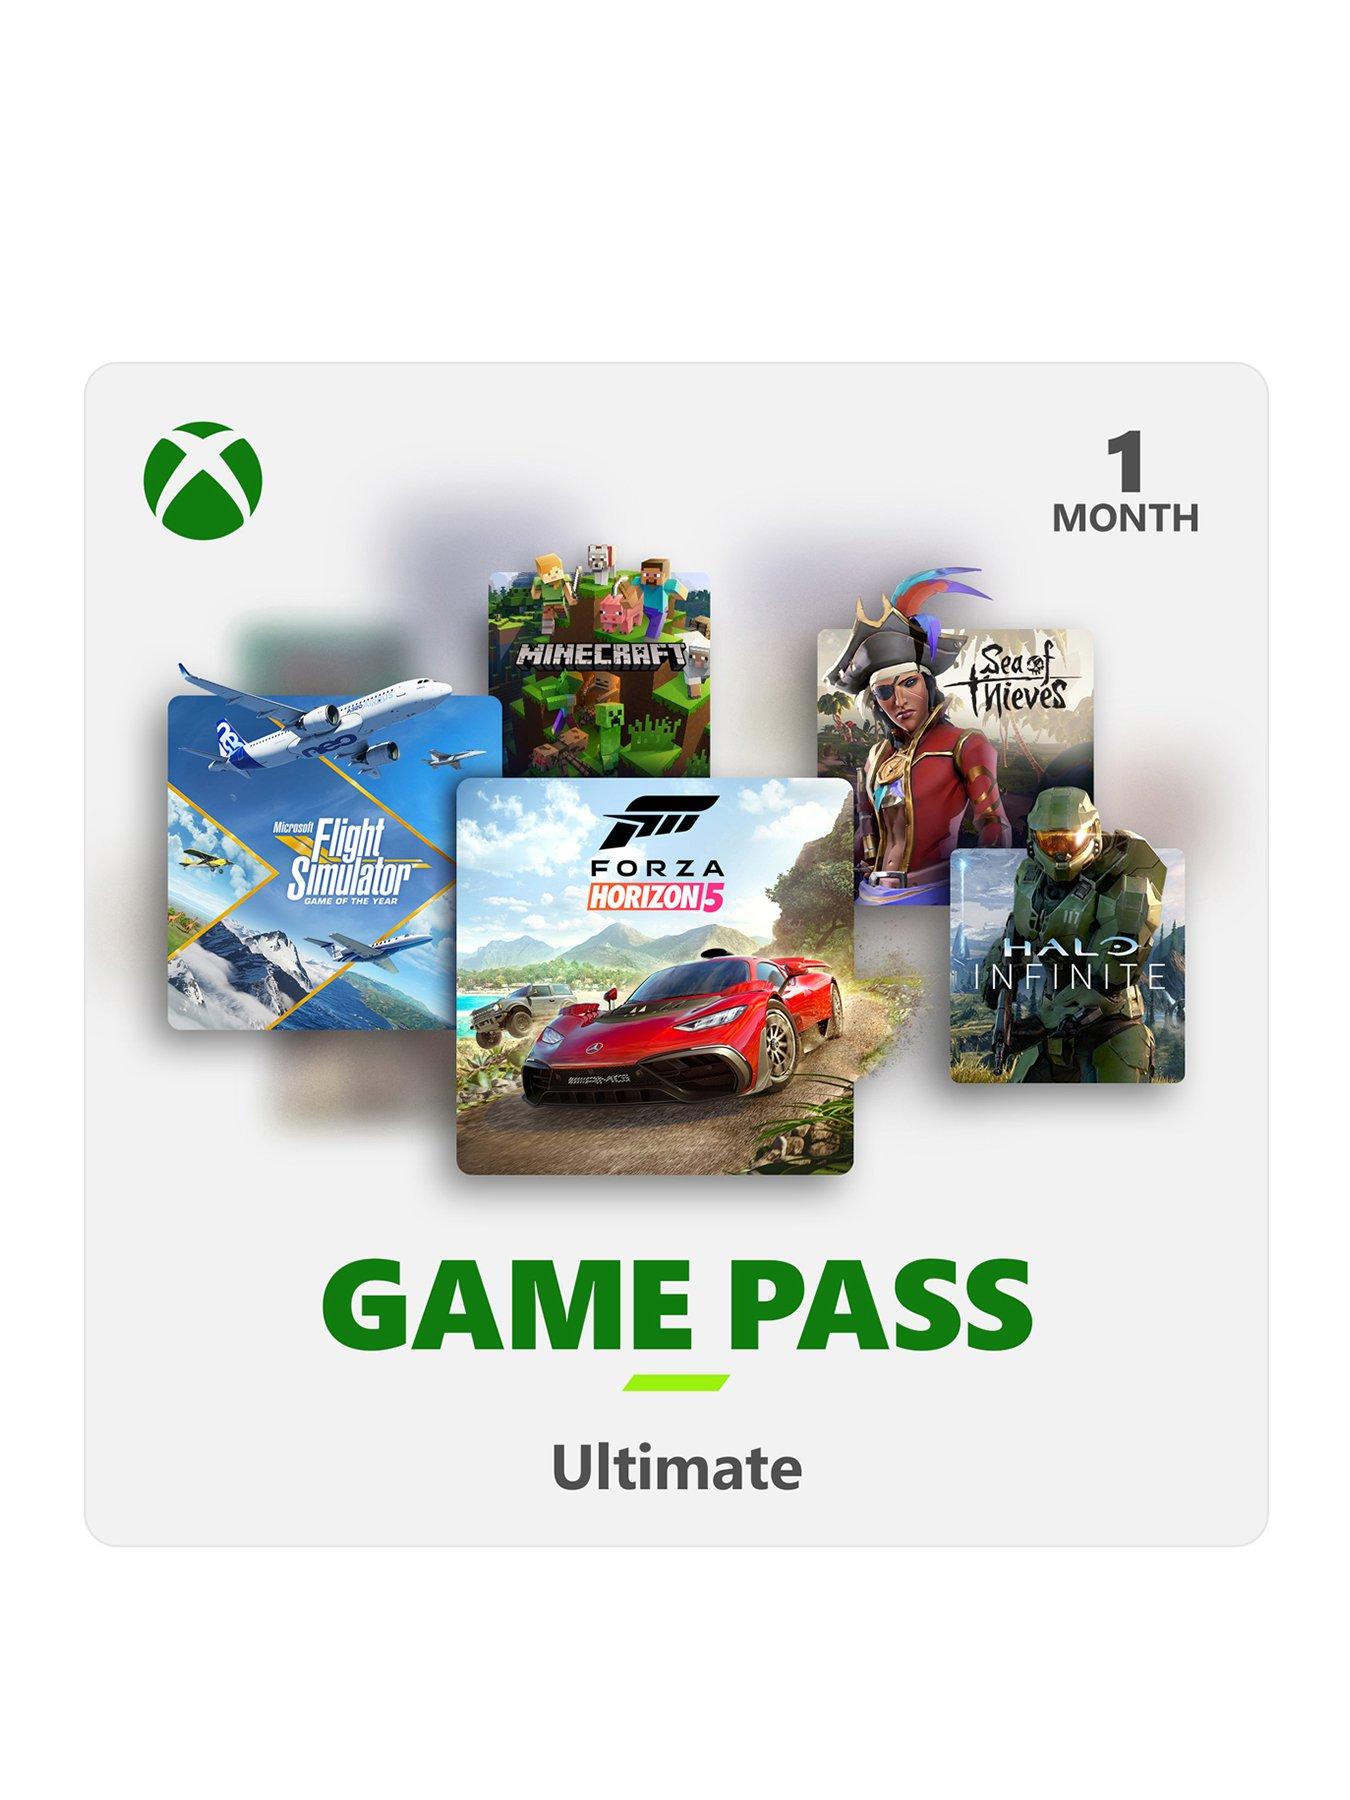 xbox game pass ultimate 1 month code